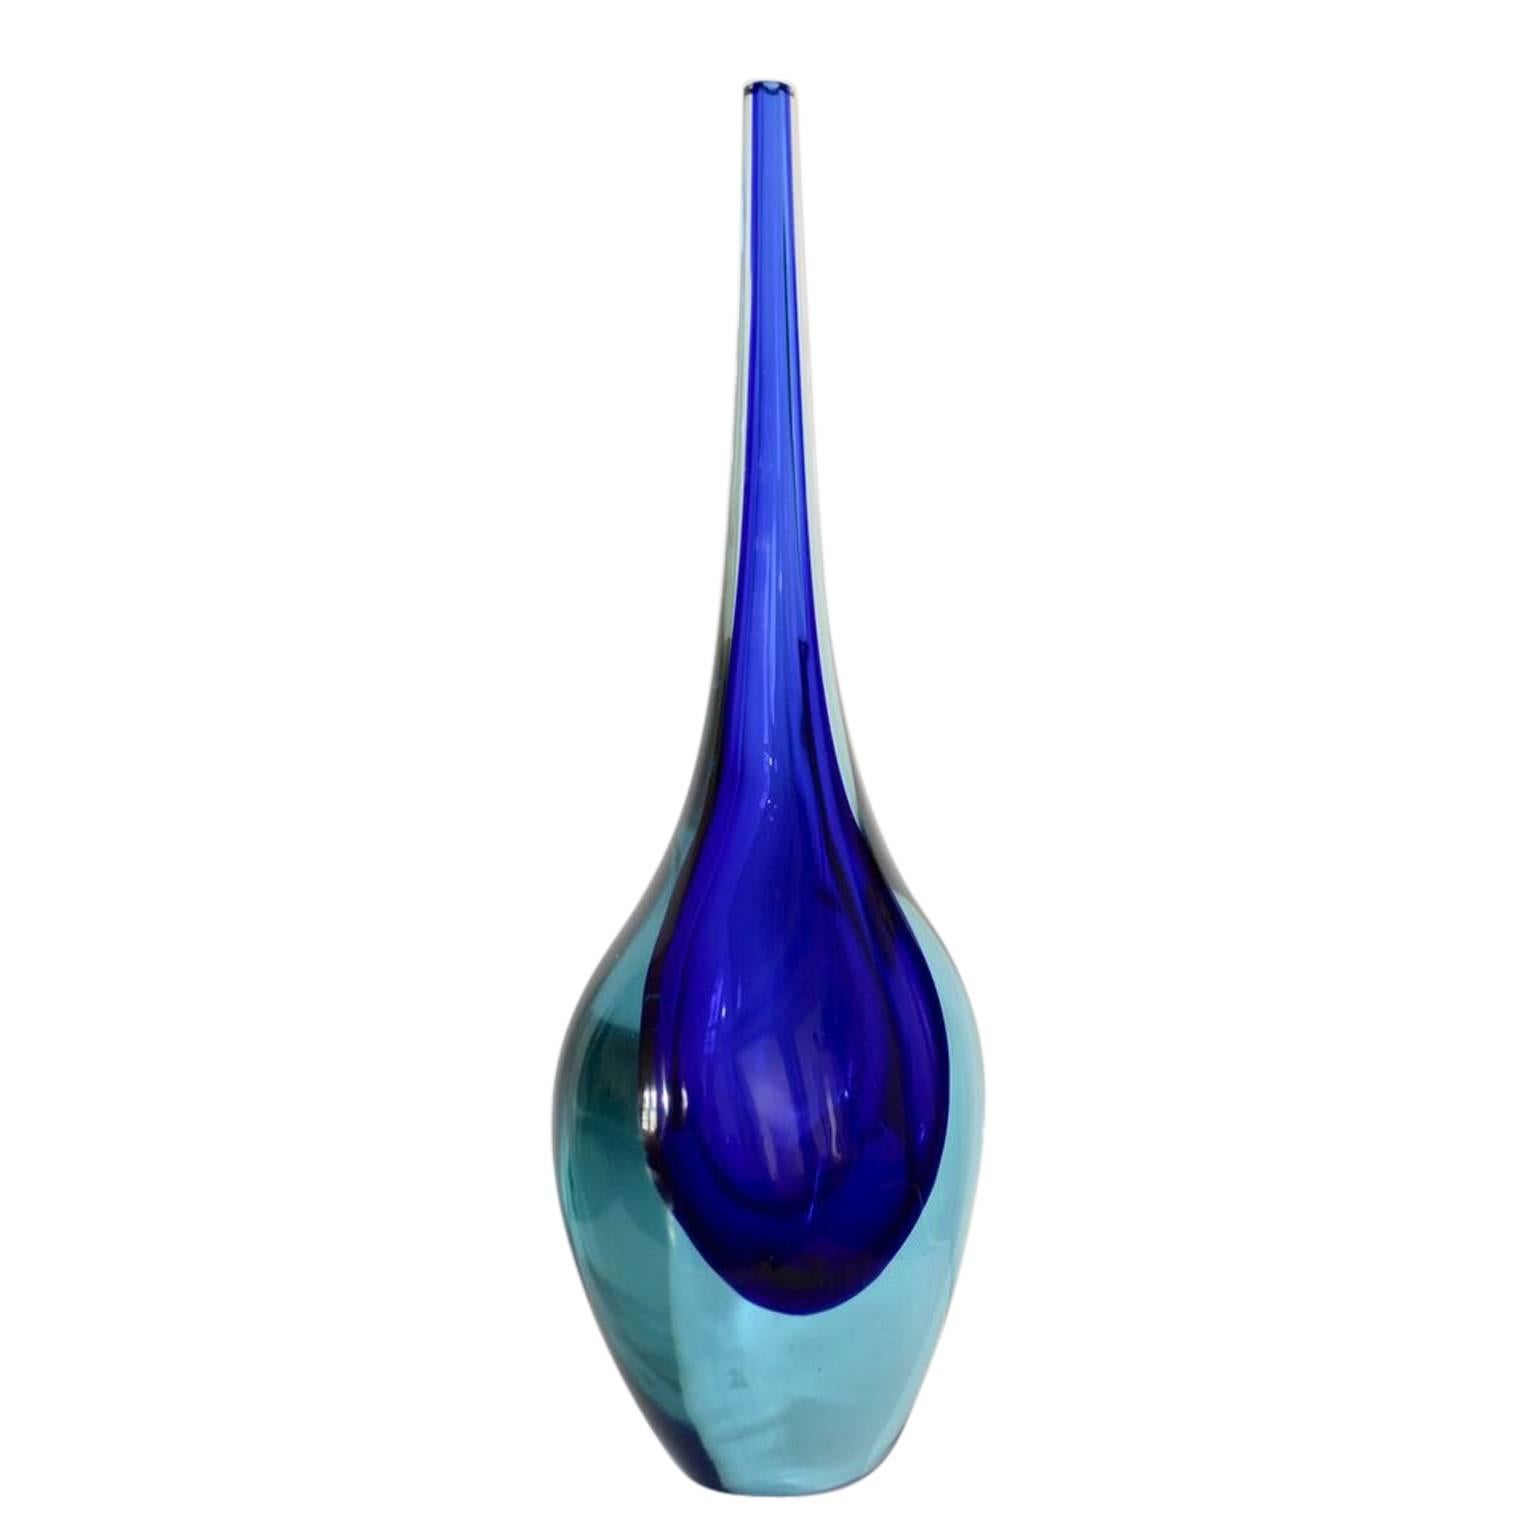 Tall Sommerso Murano turqouise and blue teardrop shaped single flower vase. Very decorative as a sculpture.